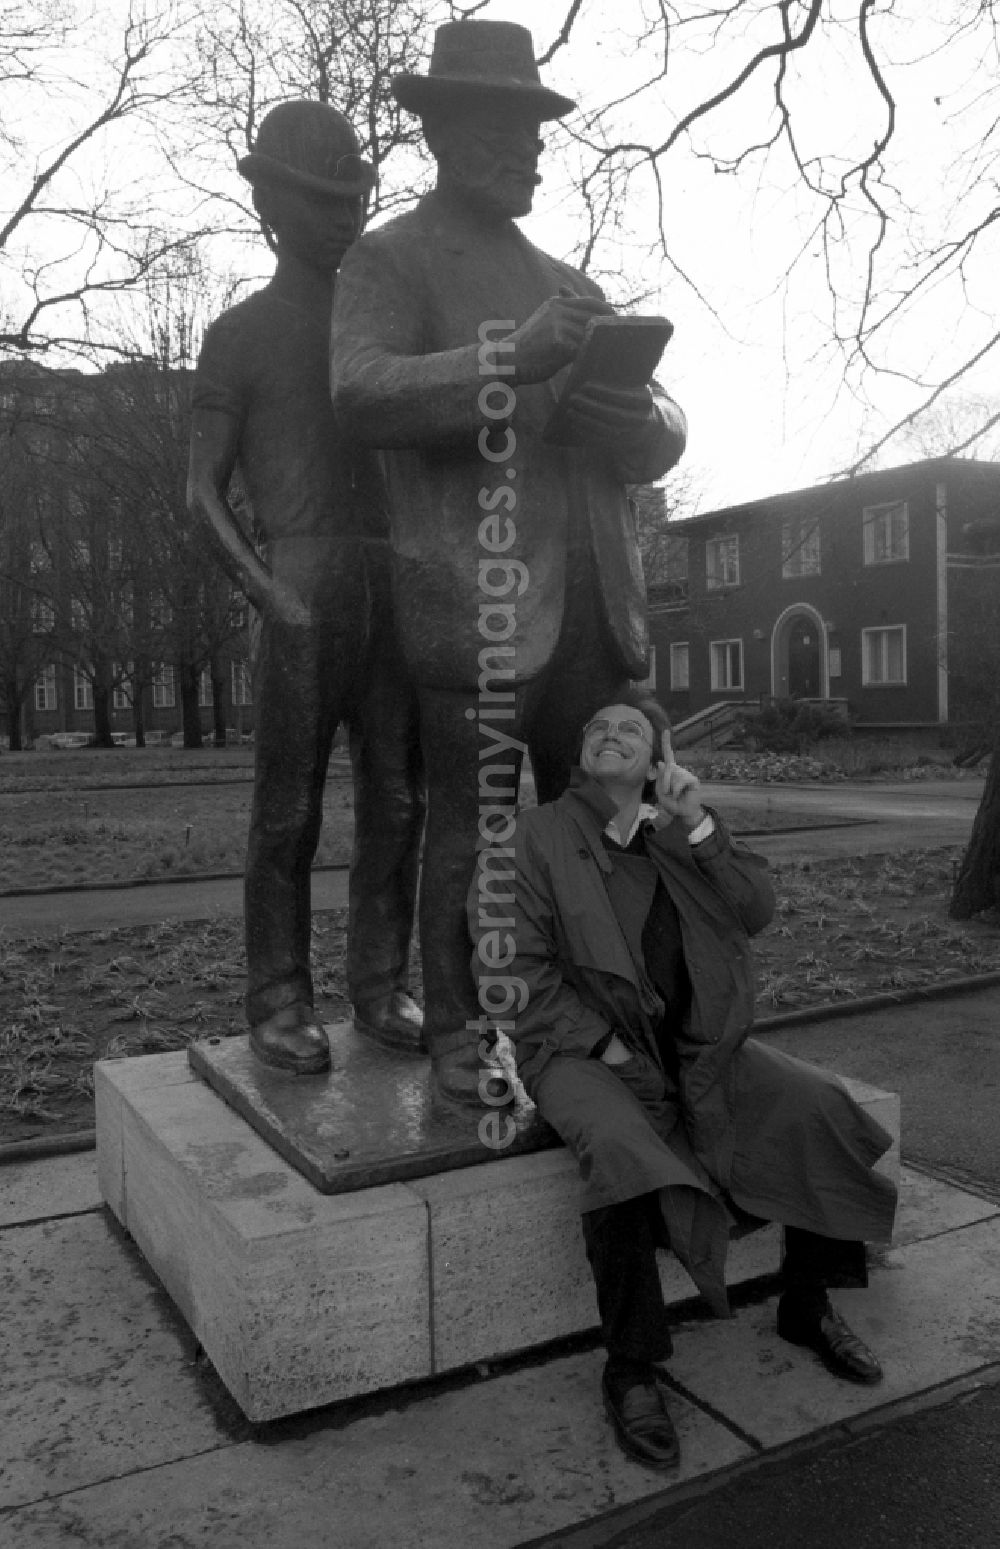 GDR image archive: Berlin - Portrait of the musician and moderator Wolfgang Lippert in front of the Zille monument in the Koellnischer Park on Wallstrasse in the Mitte district of Berlin East Berlin in the area of the former GDR, German Democratic Republic